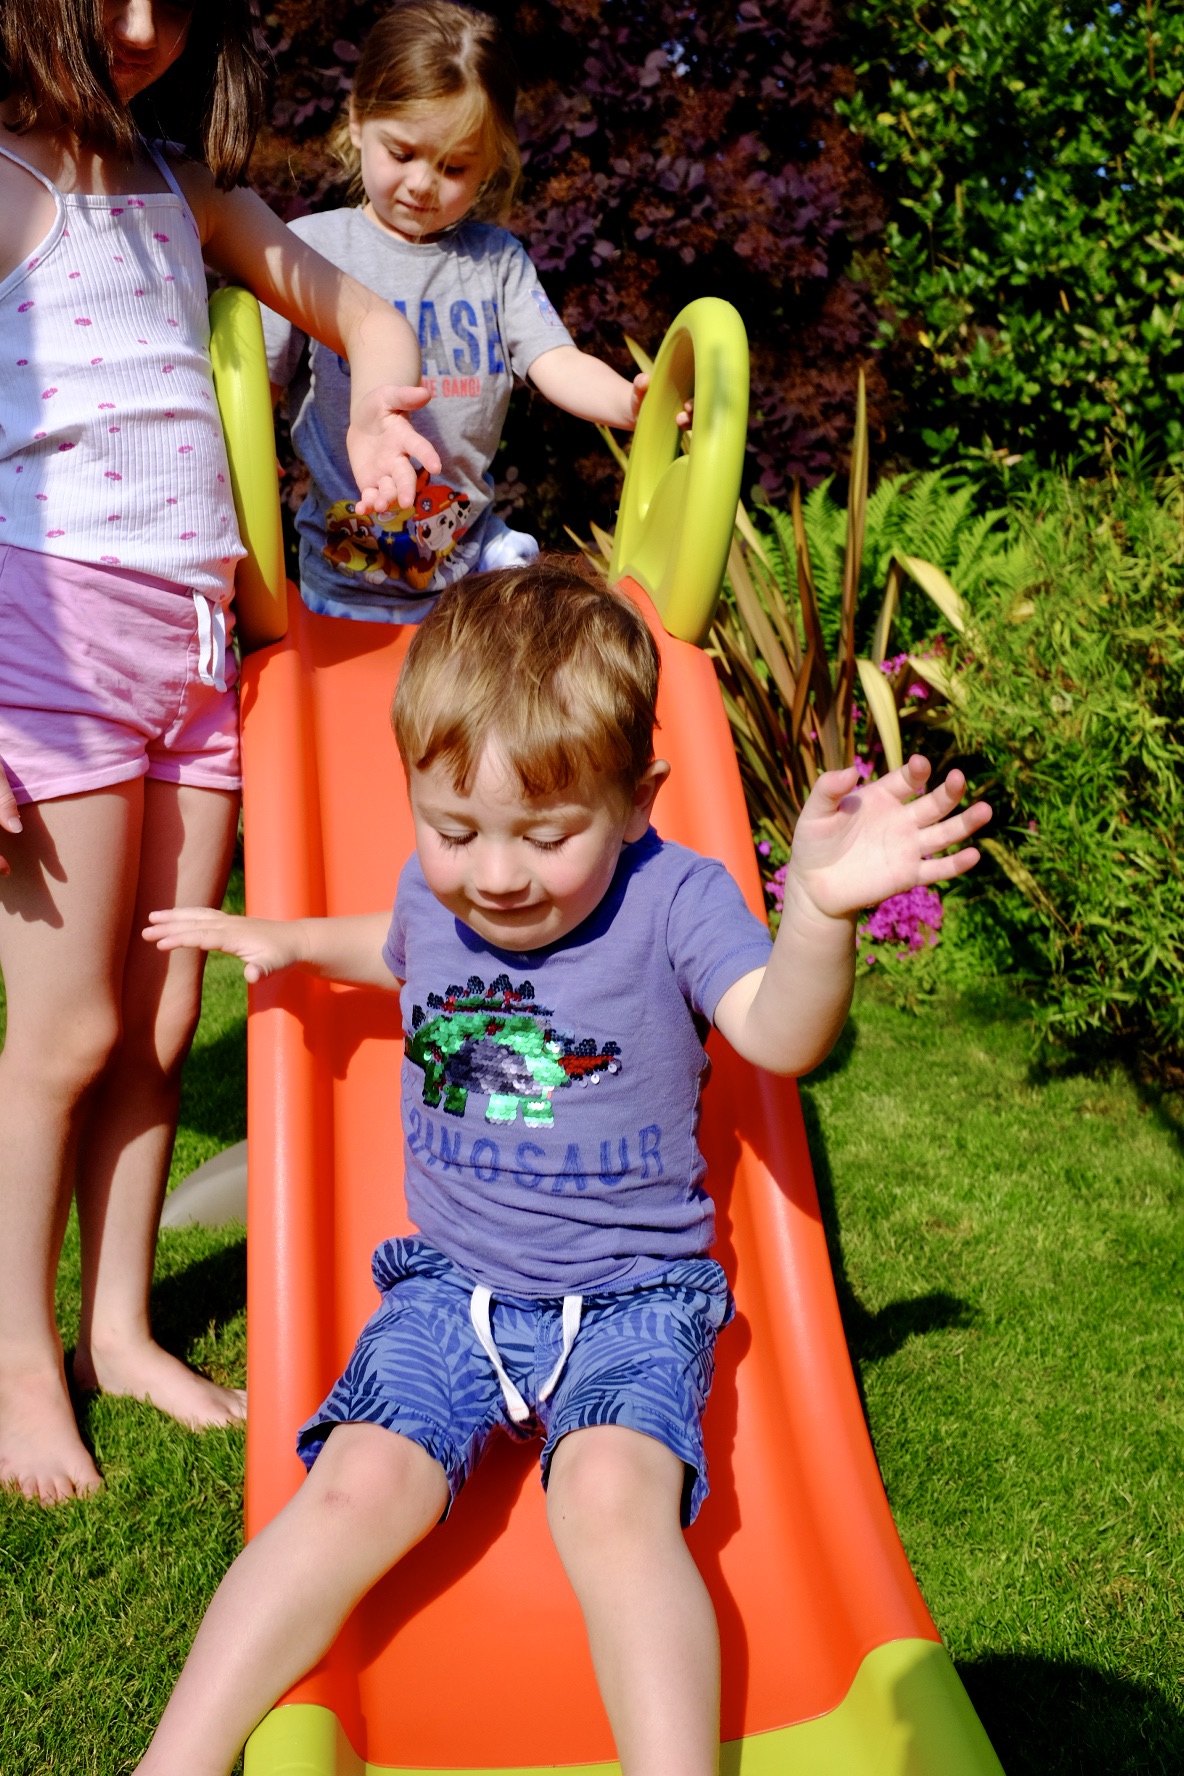 Review: Smoby Megagliss 2 in 1 Large Kids Slide - Pretty Big Butterflies